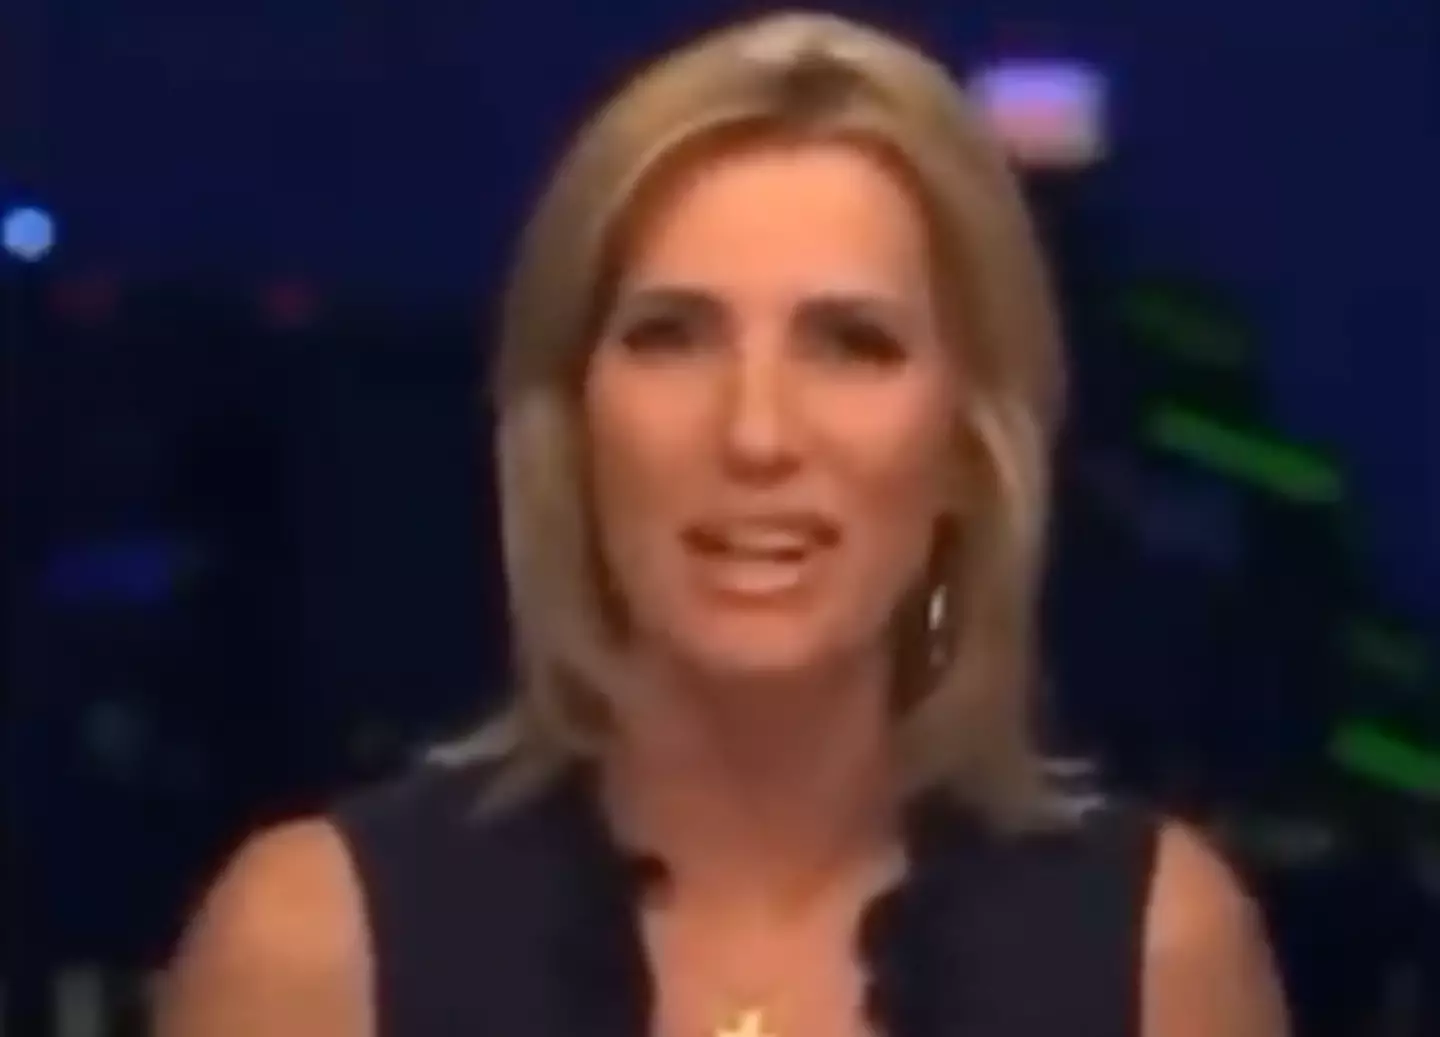 Ingraham claimed the scene was rehearsed.